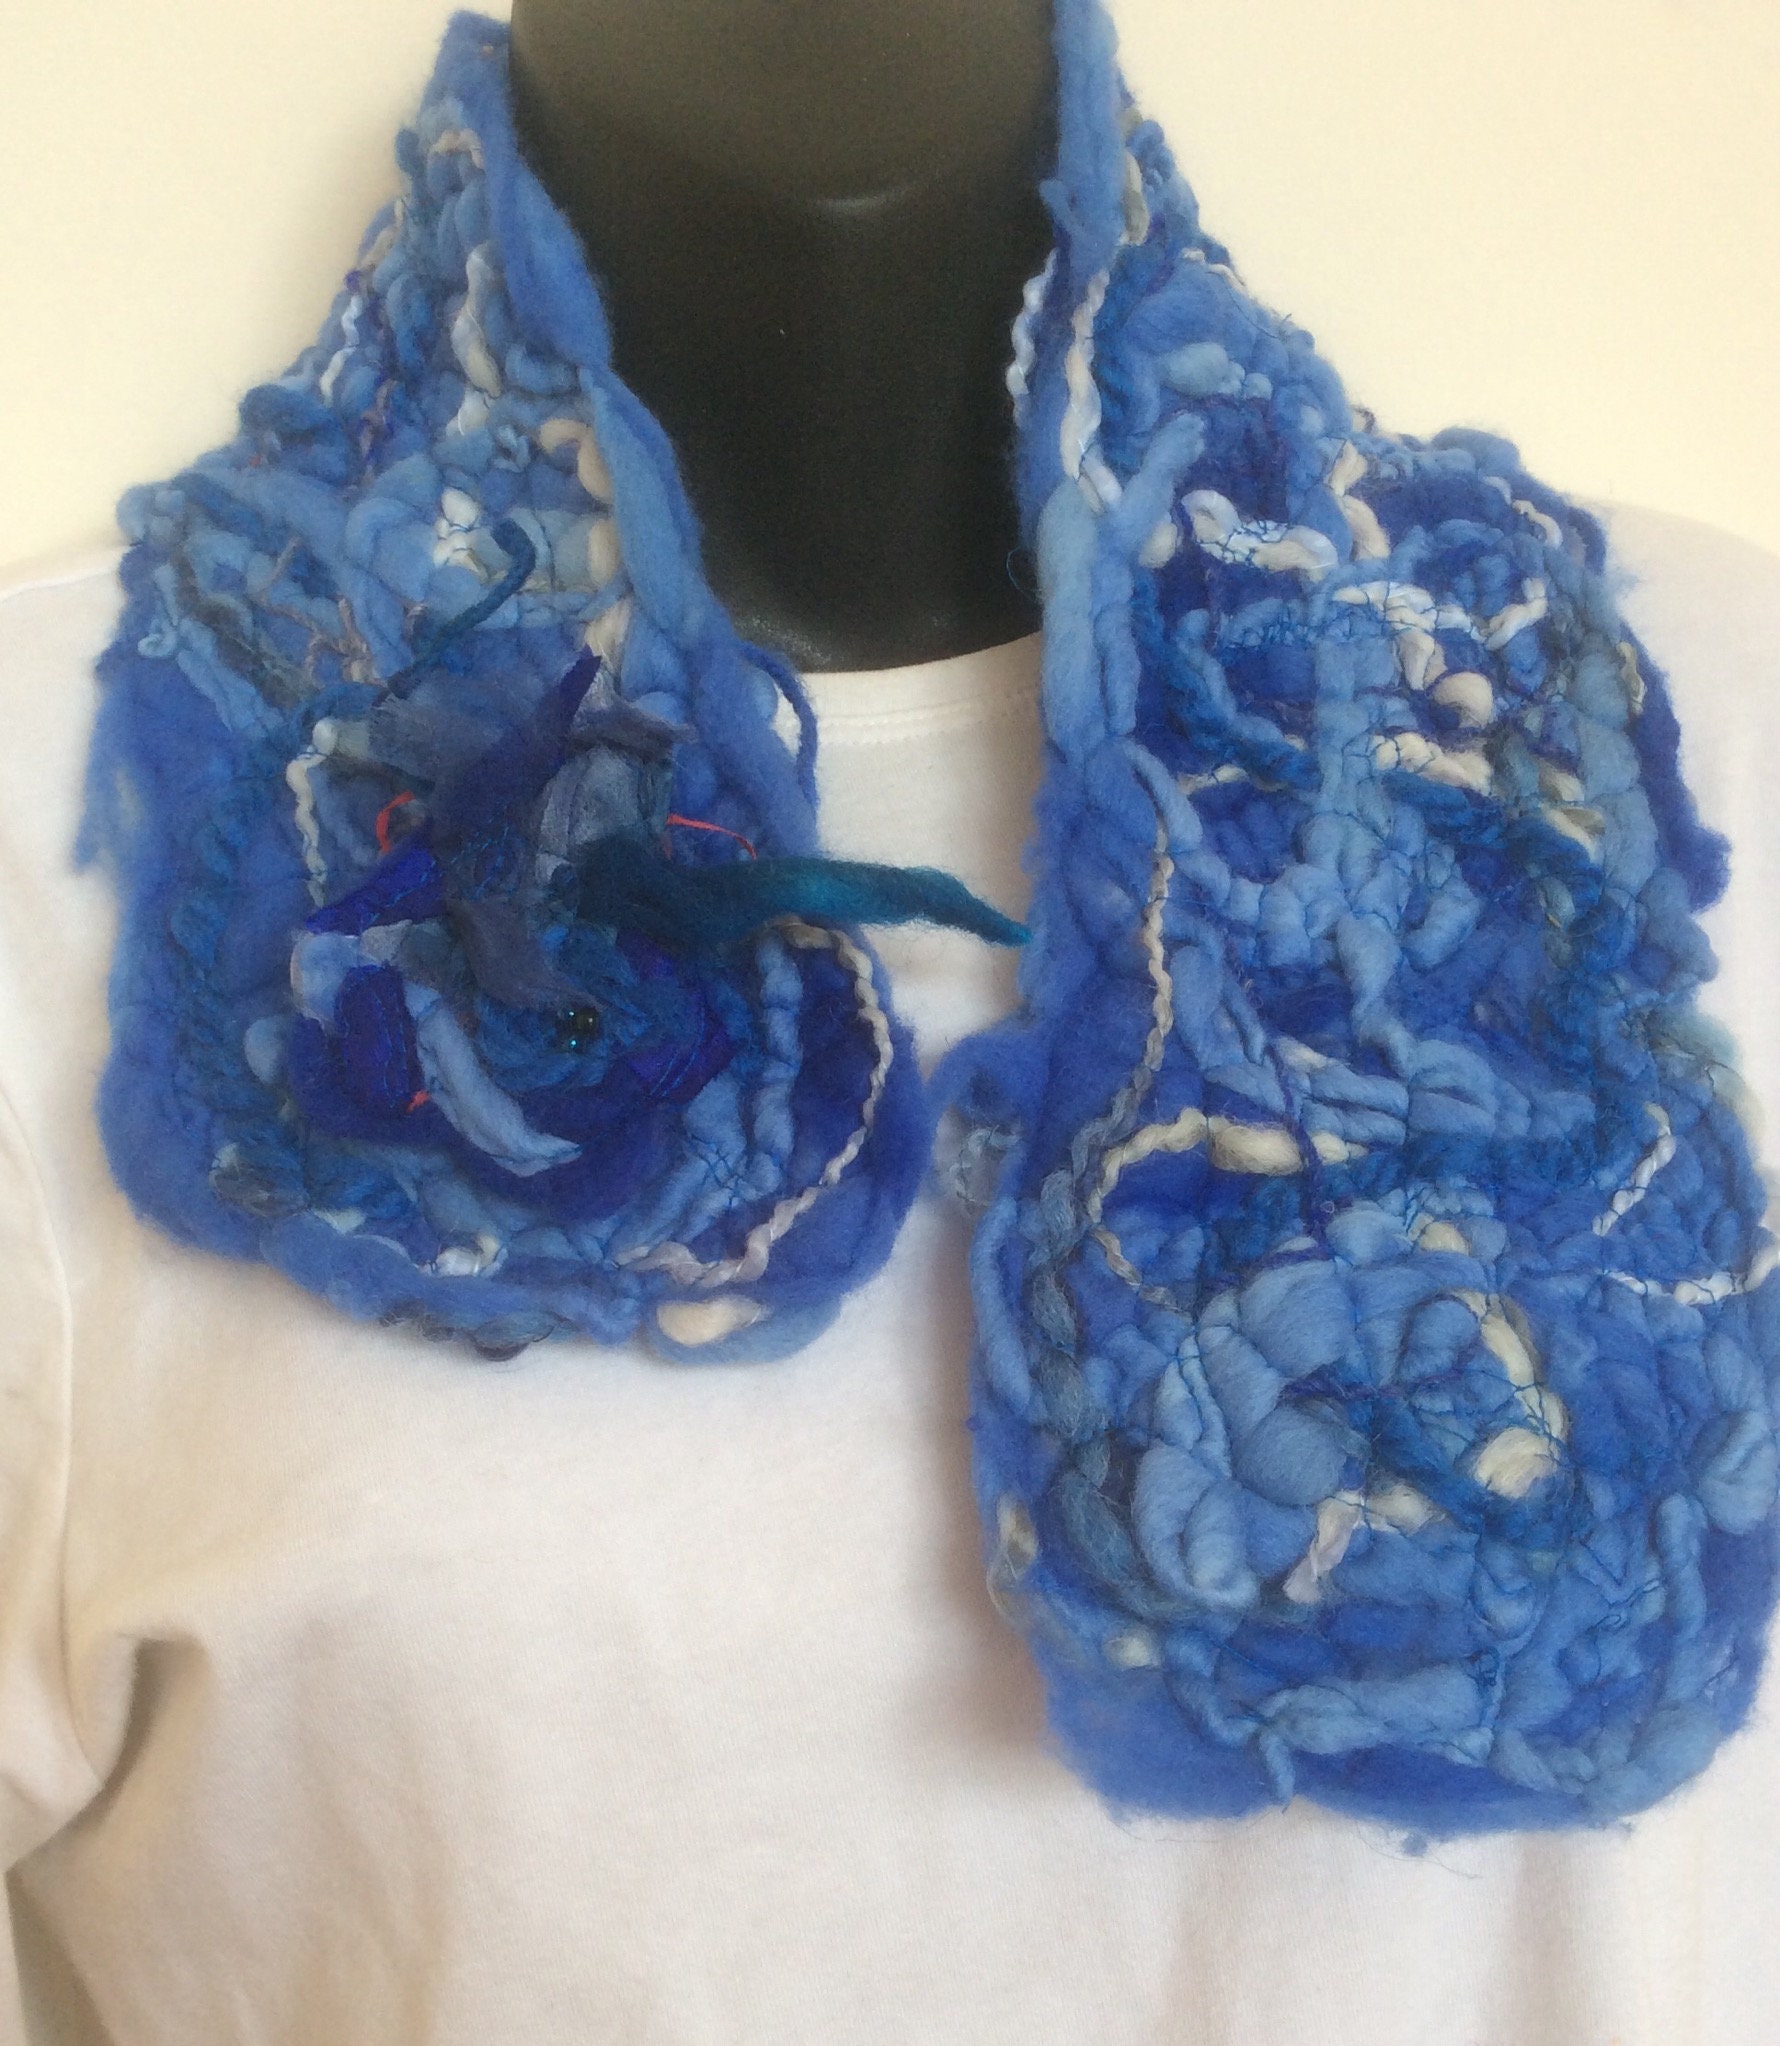 Wool neckwarmer shades of blue handmade brooch to complement textured light and warm